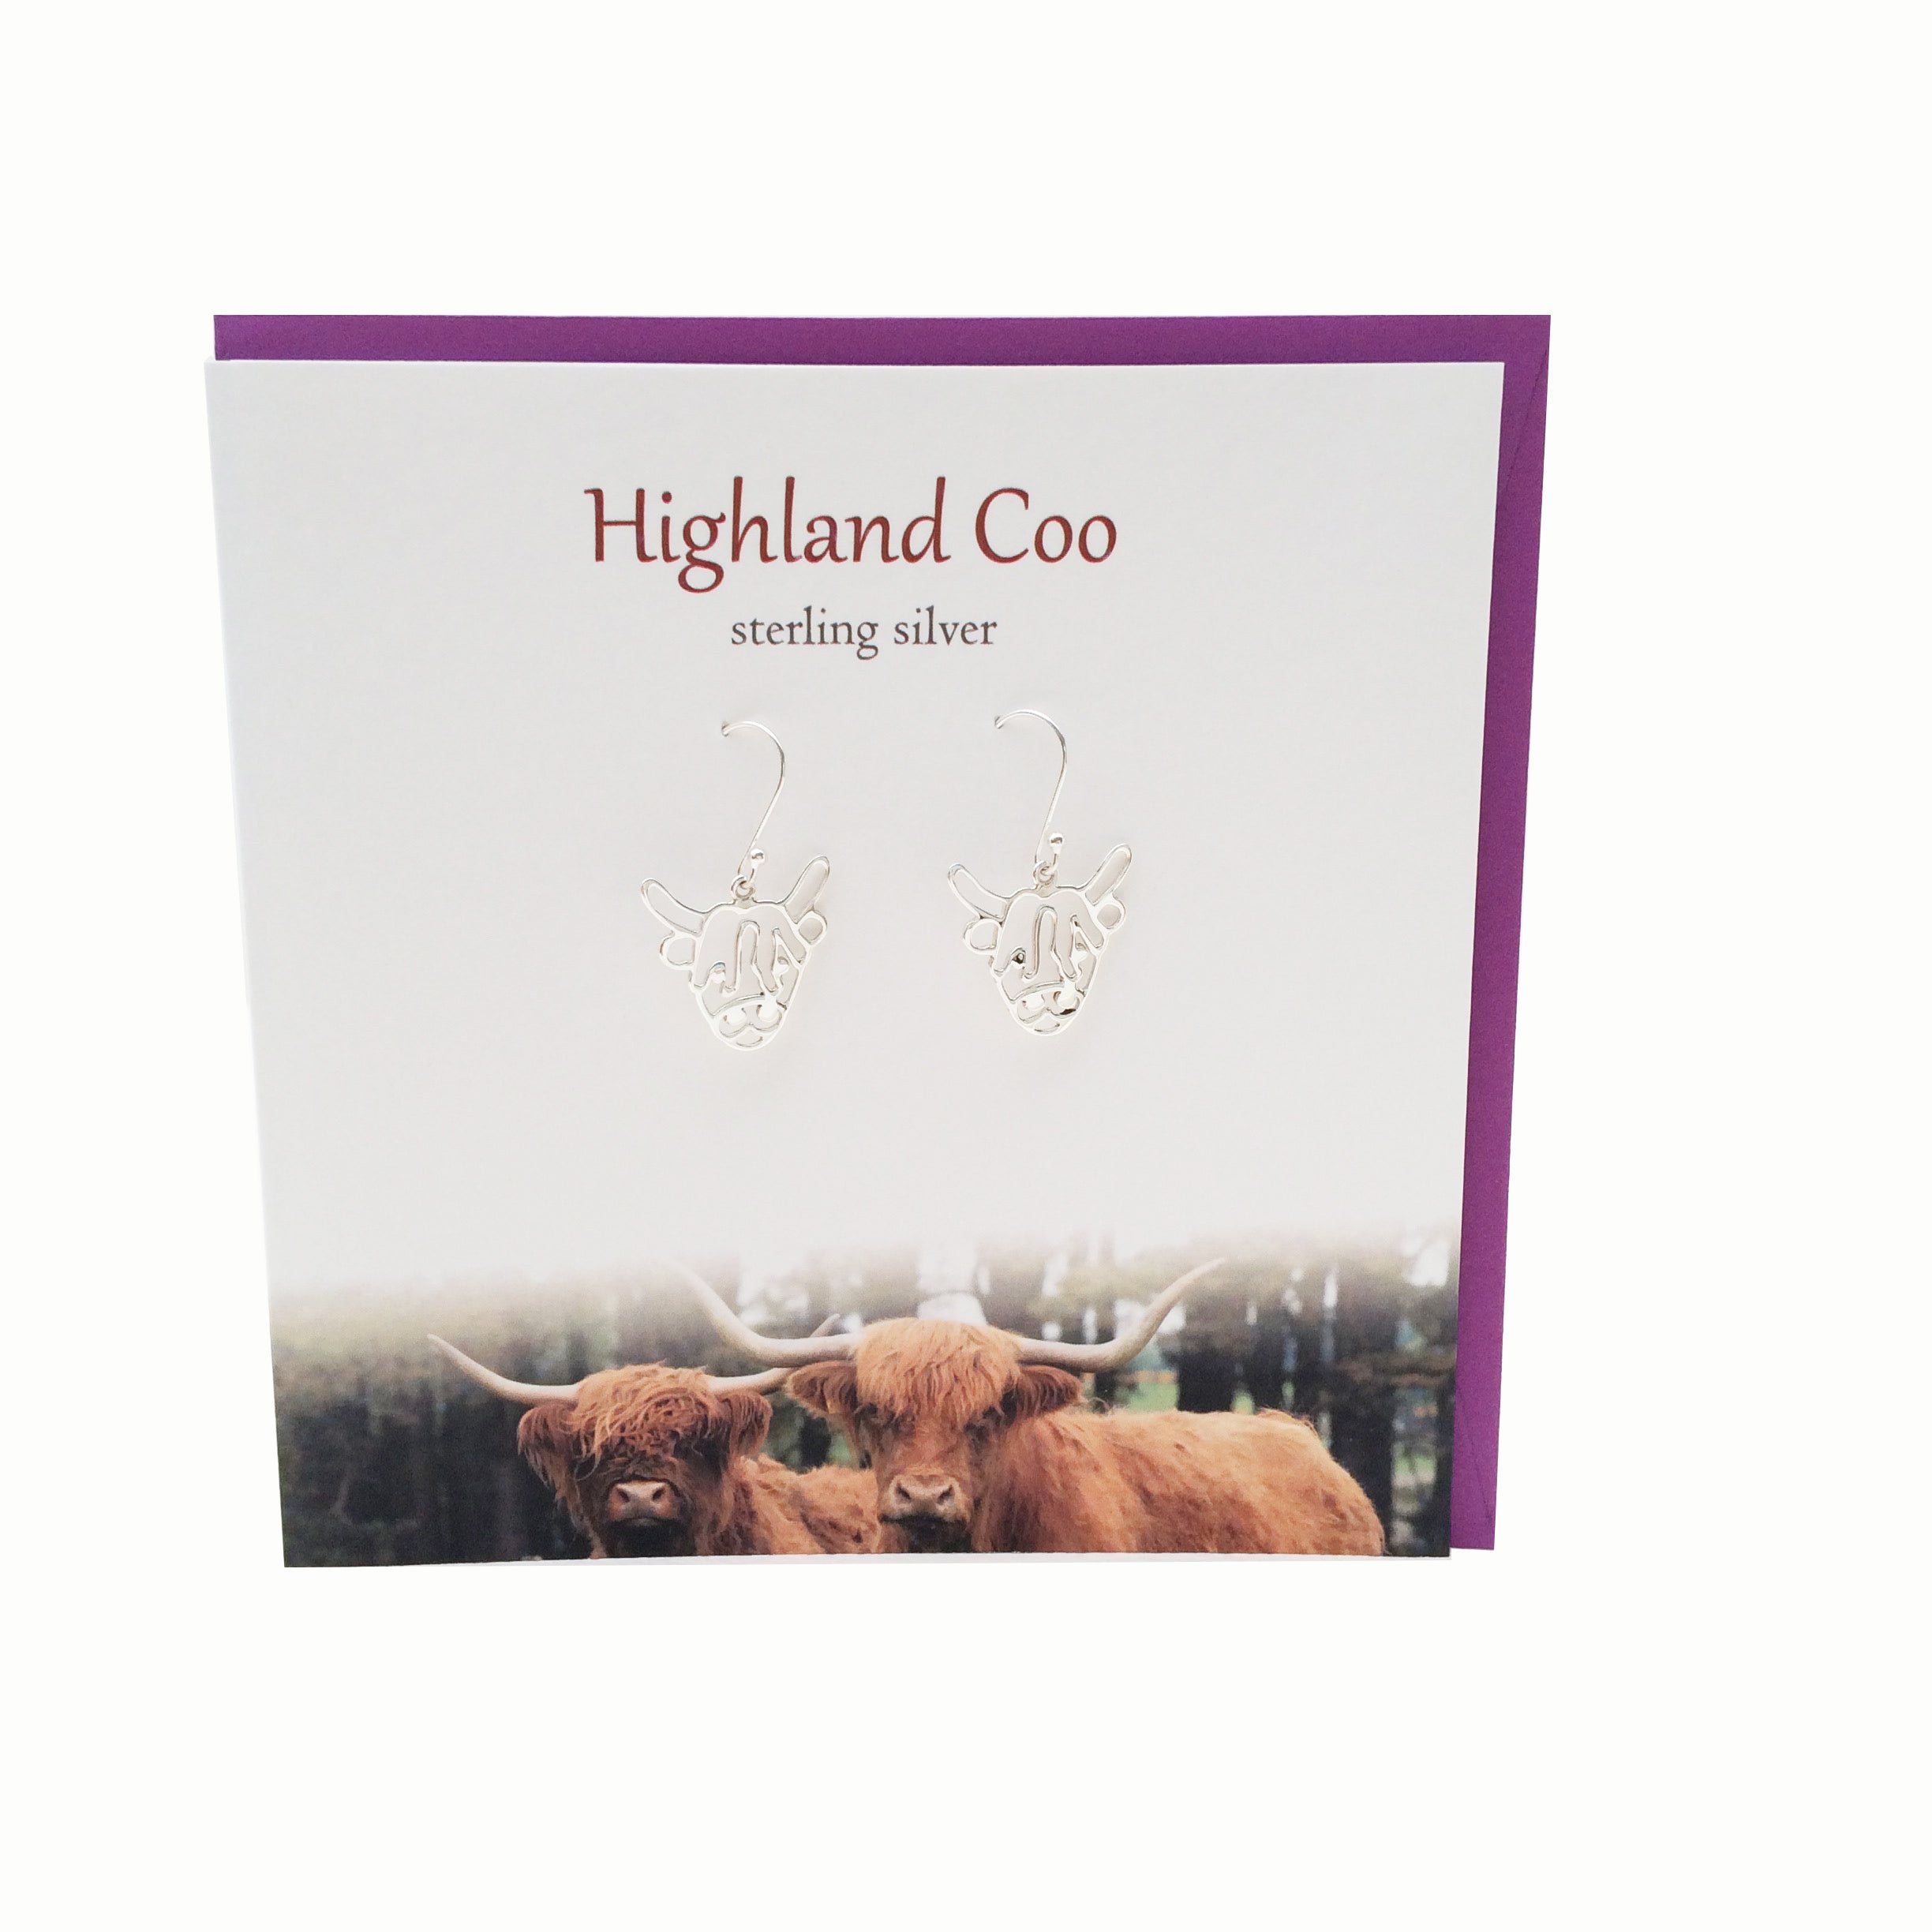 Highland Coo Scotland sterling silver earrings | The Silver Studio 